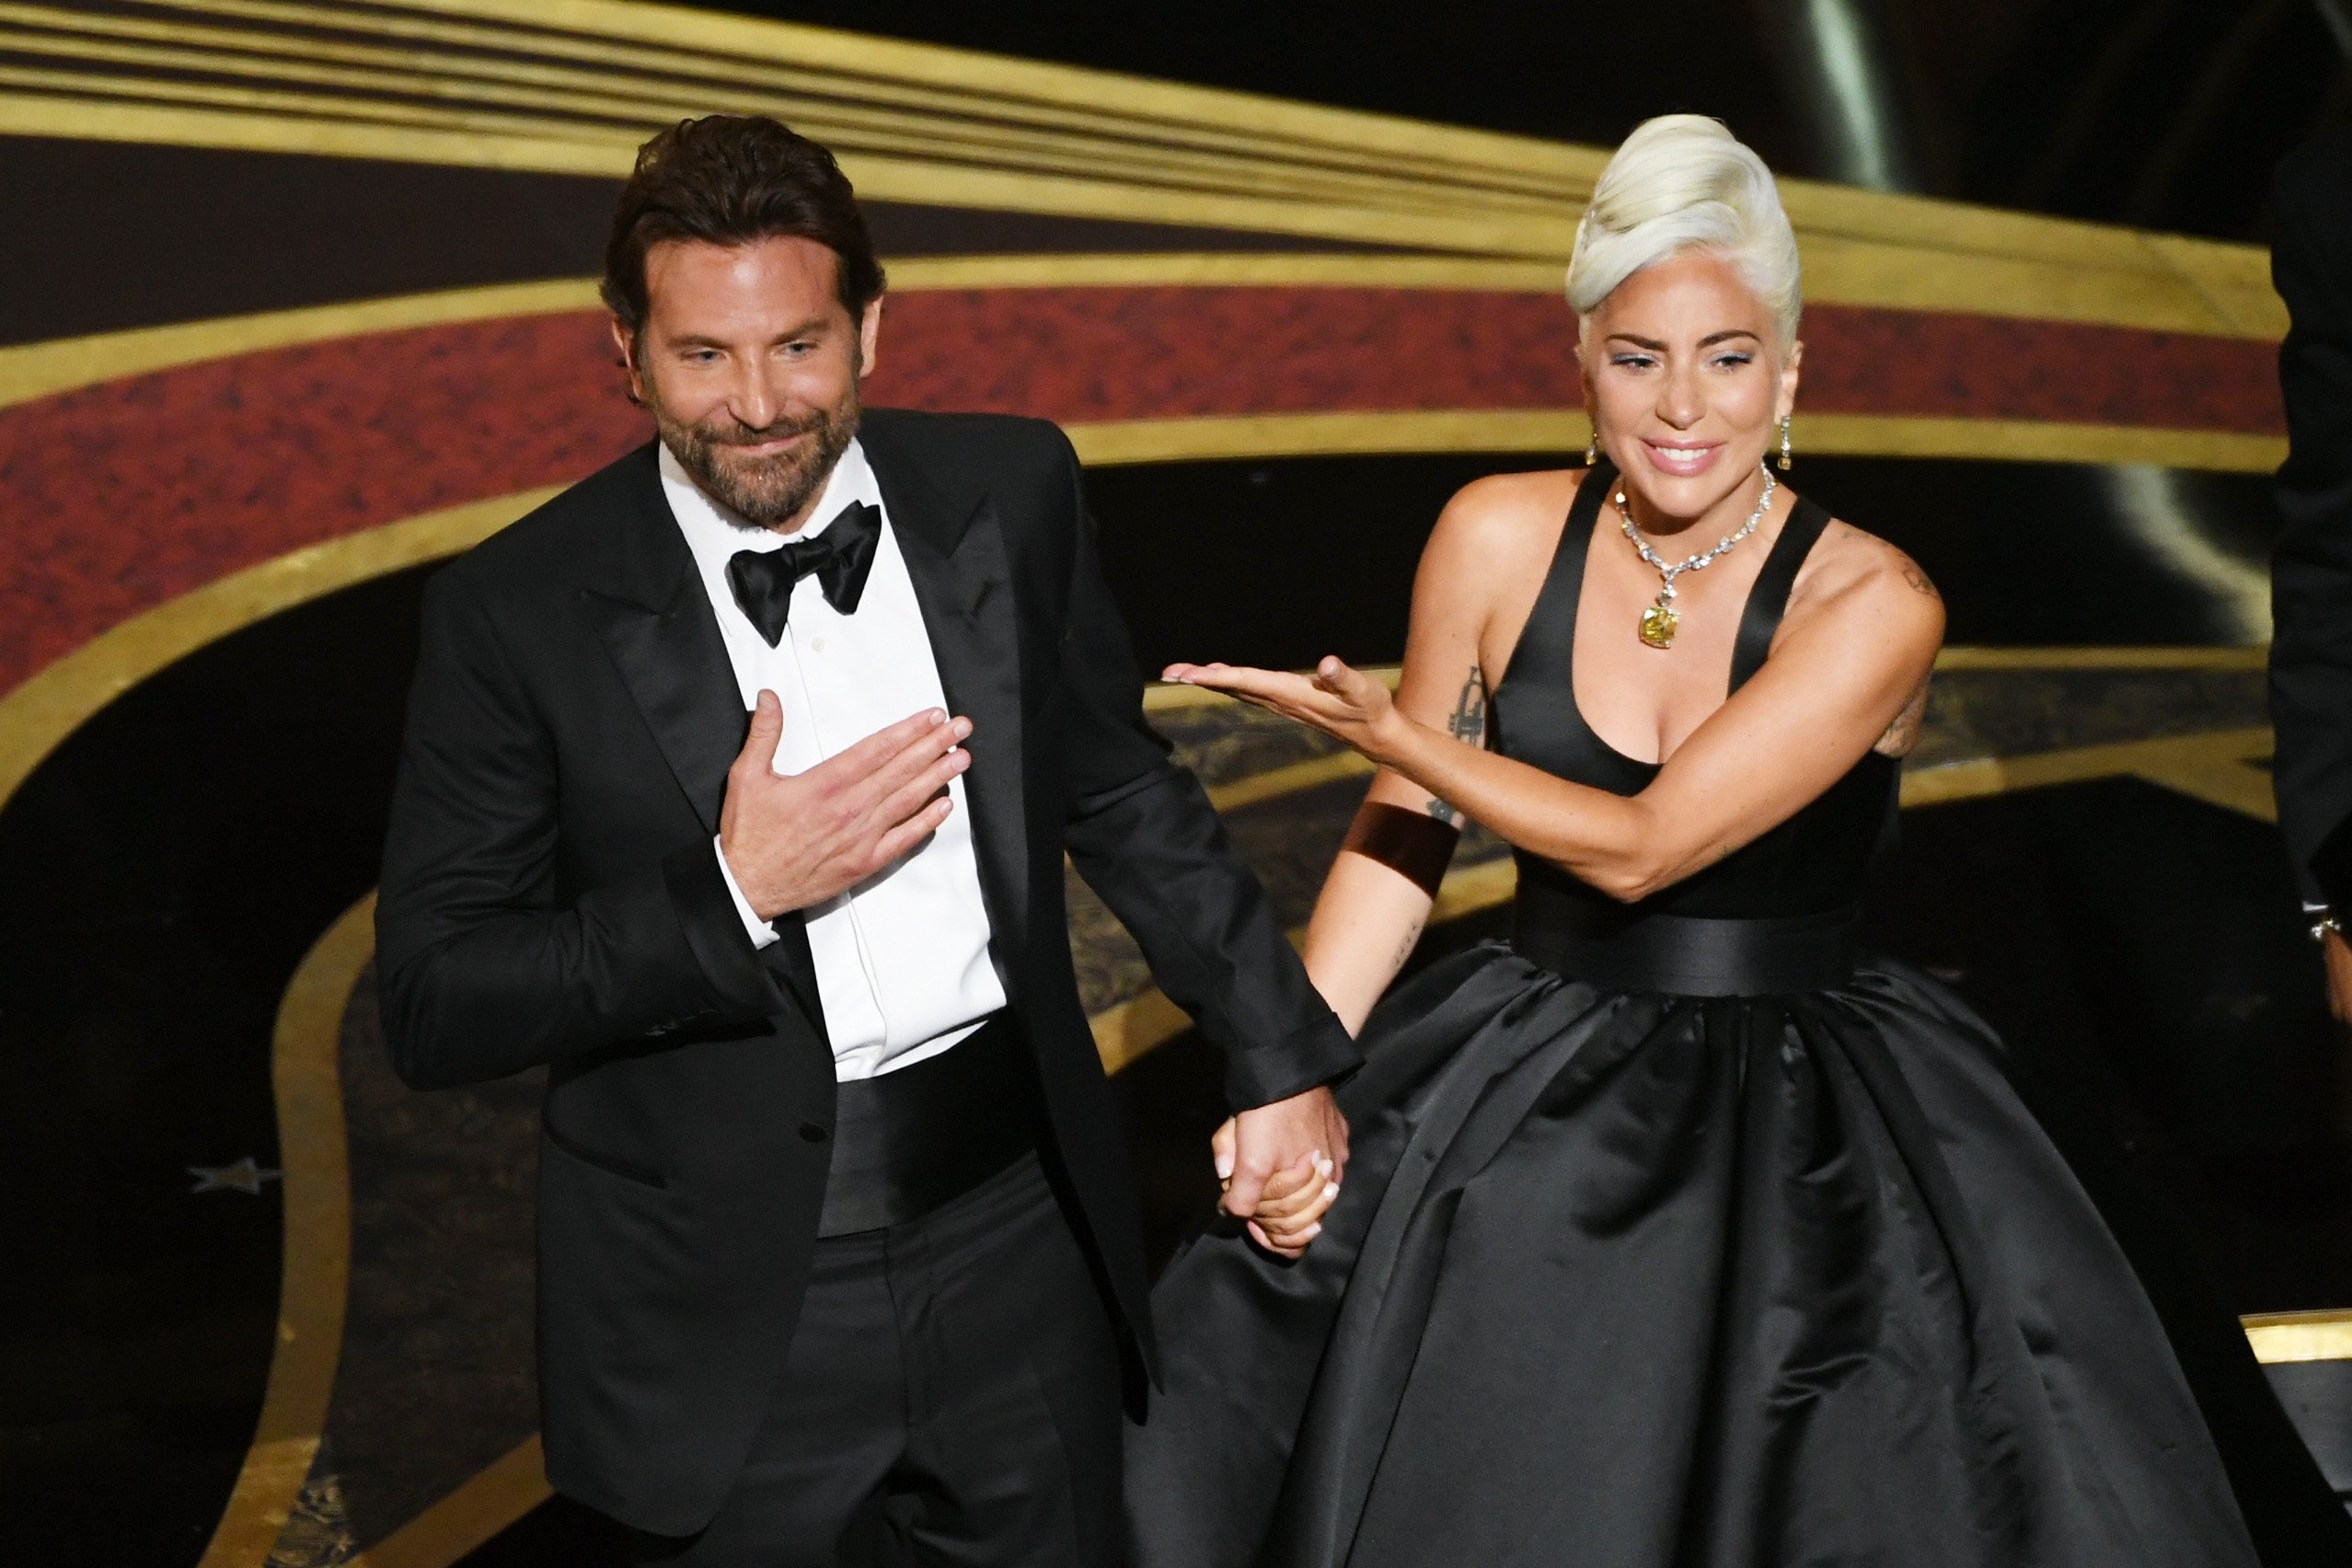 Bradley Cooper and Lady Gaga holding hands at the 2019 Academy Awards | Photo: Getty Images